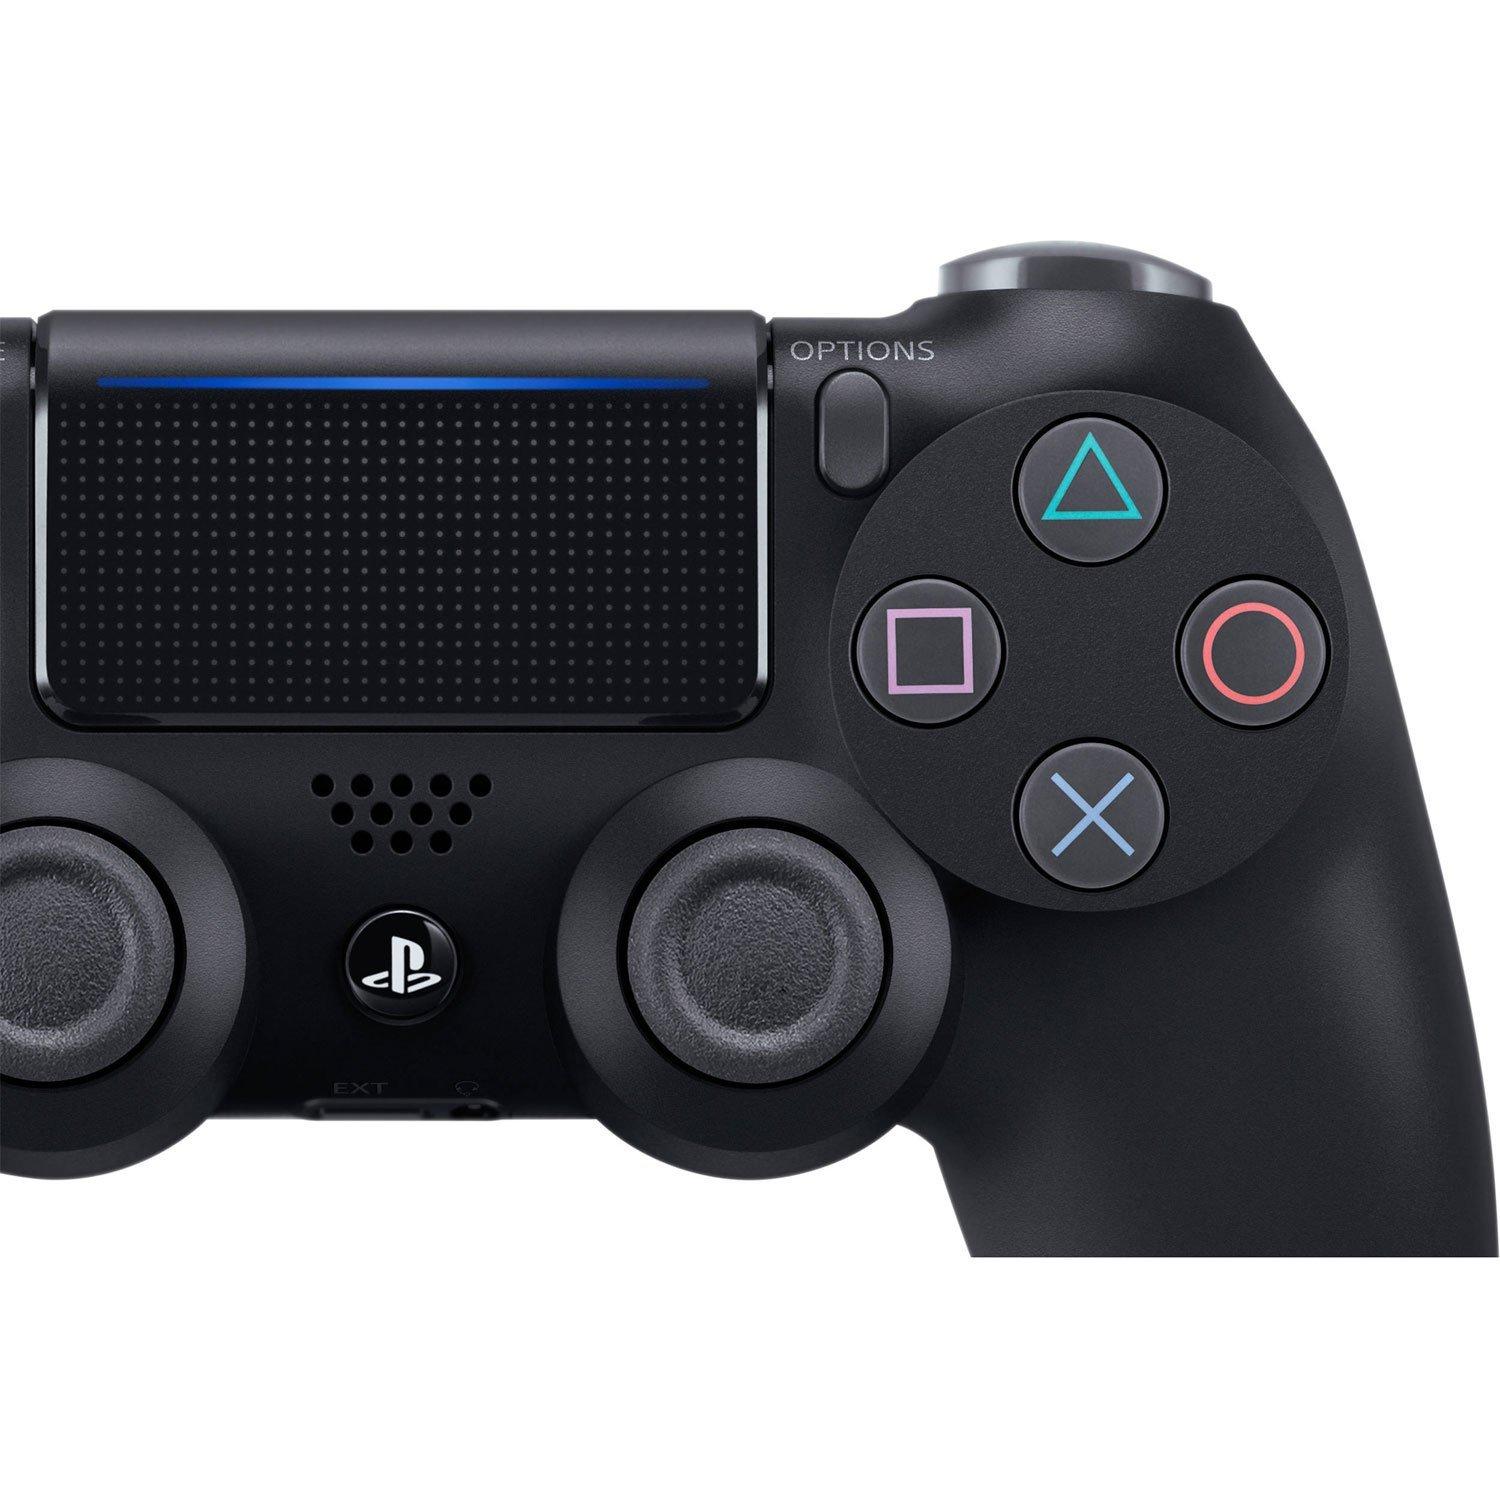 PlayStation 4 (PS4) Controllers in PlayStation 4 Consoles, Games